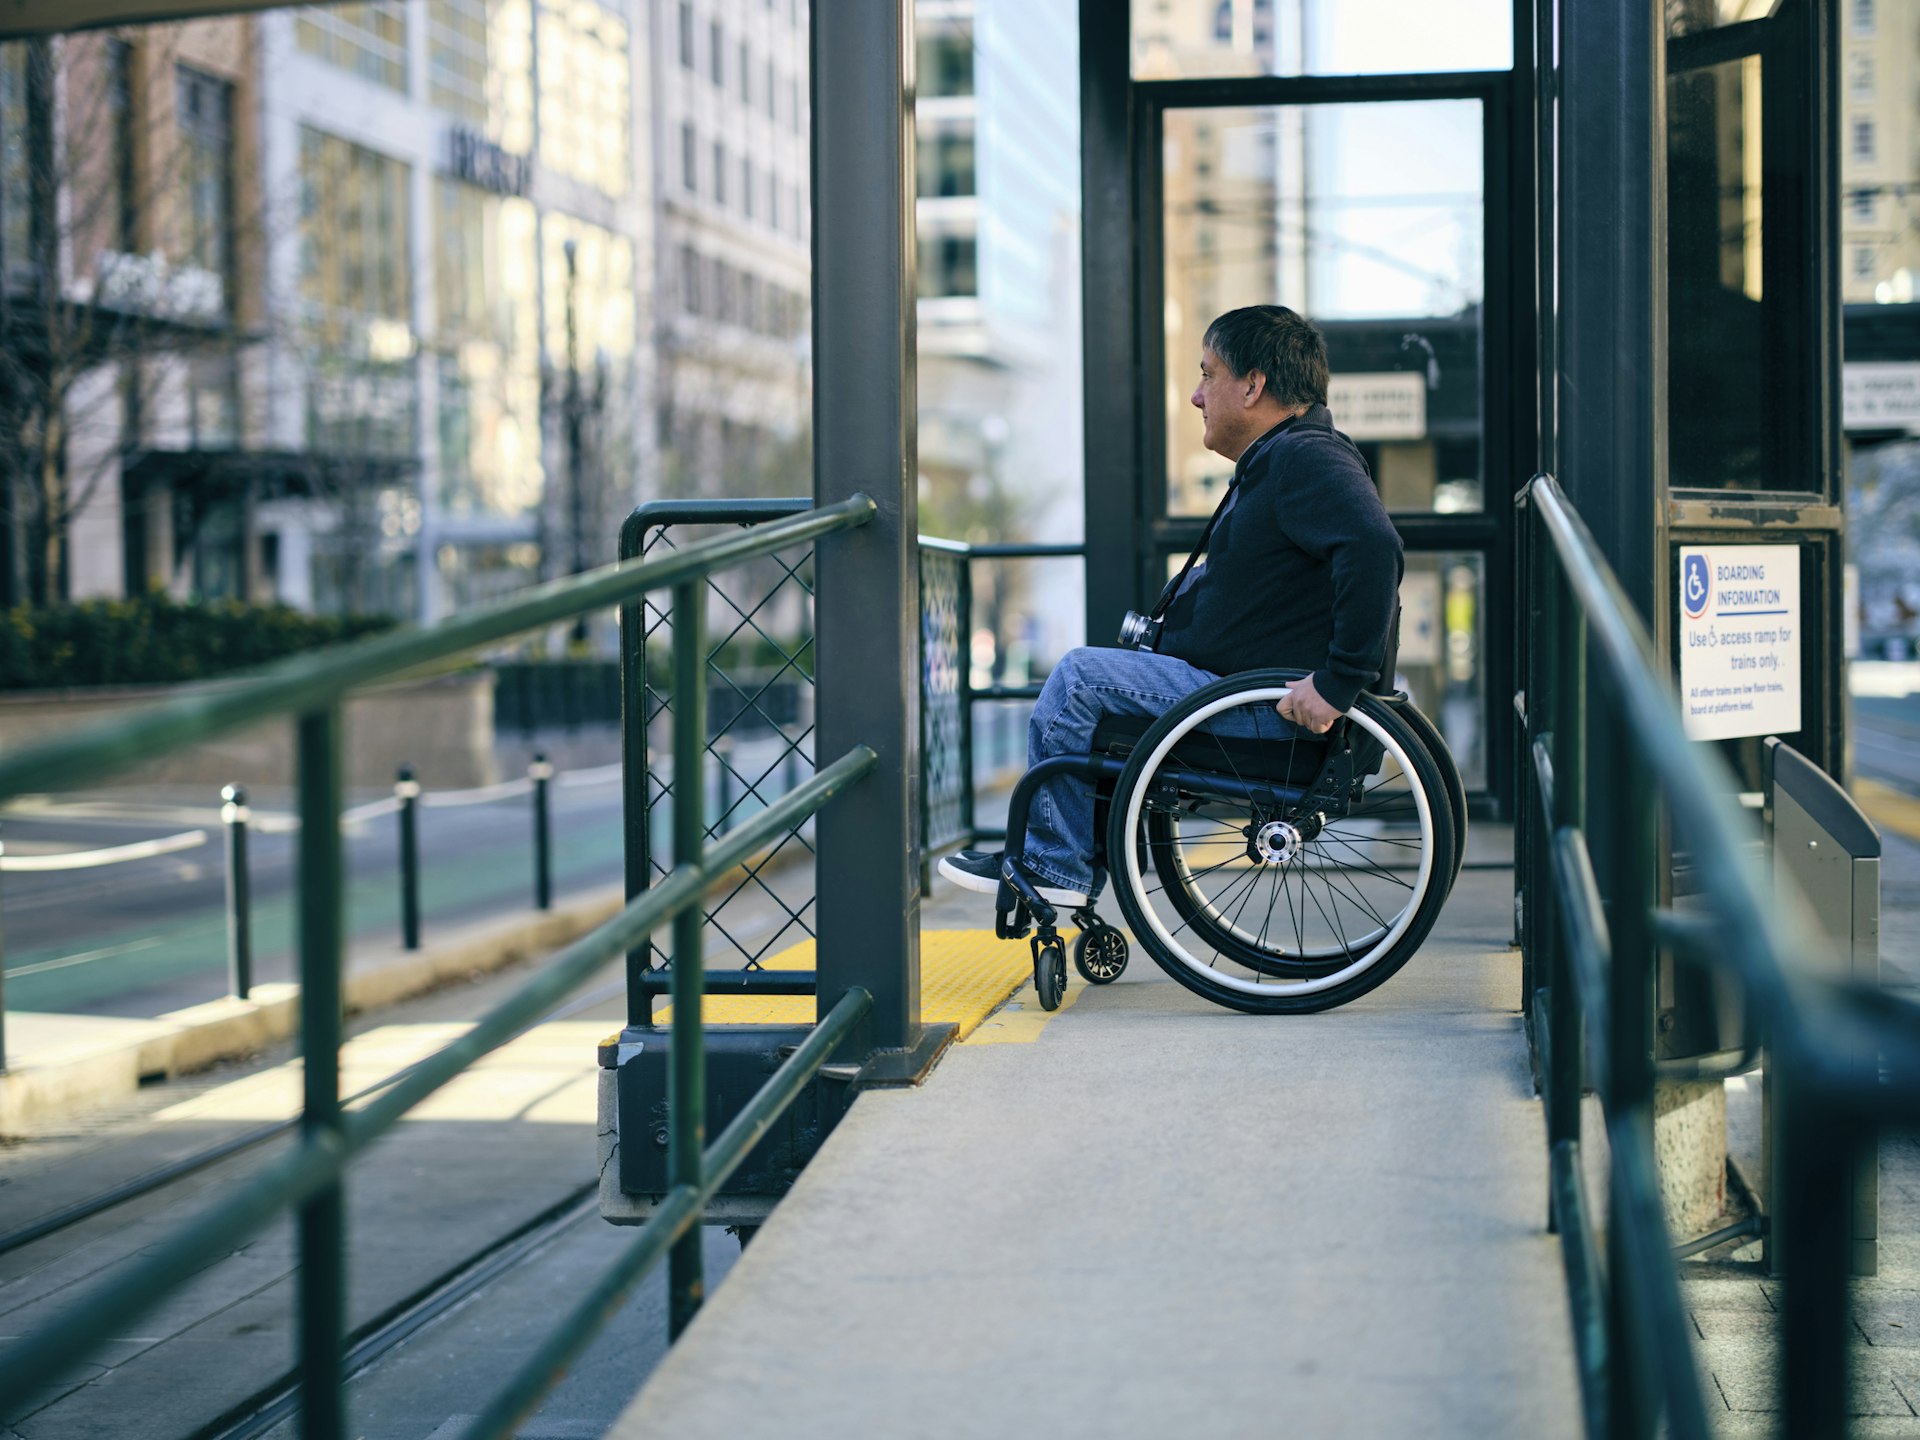 A man in a wheelchair waits on a ramp to board a light rail service in a city